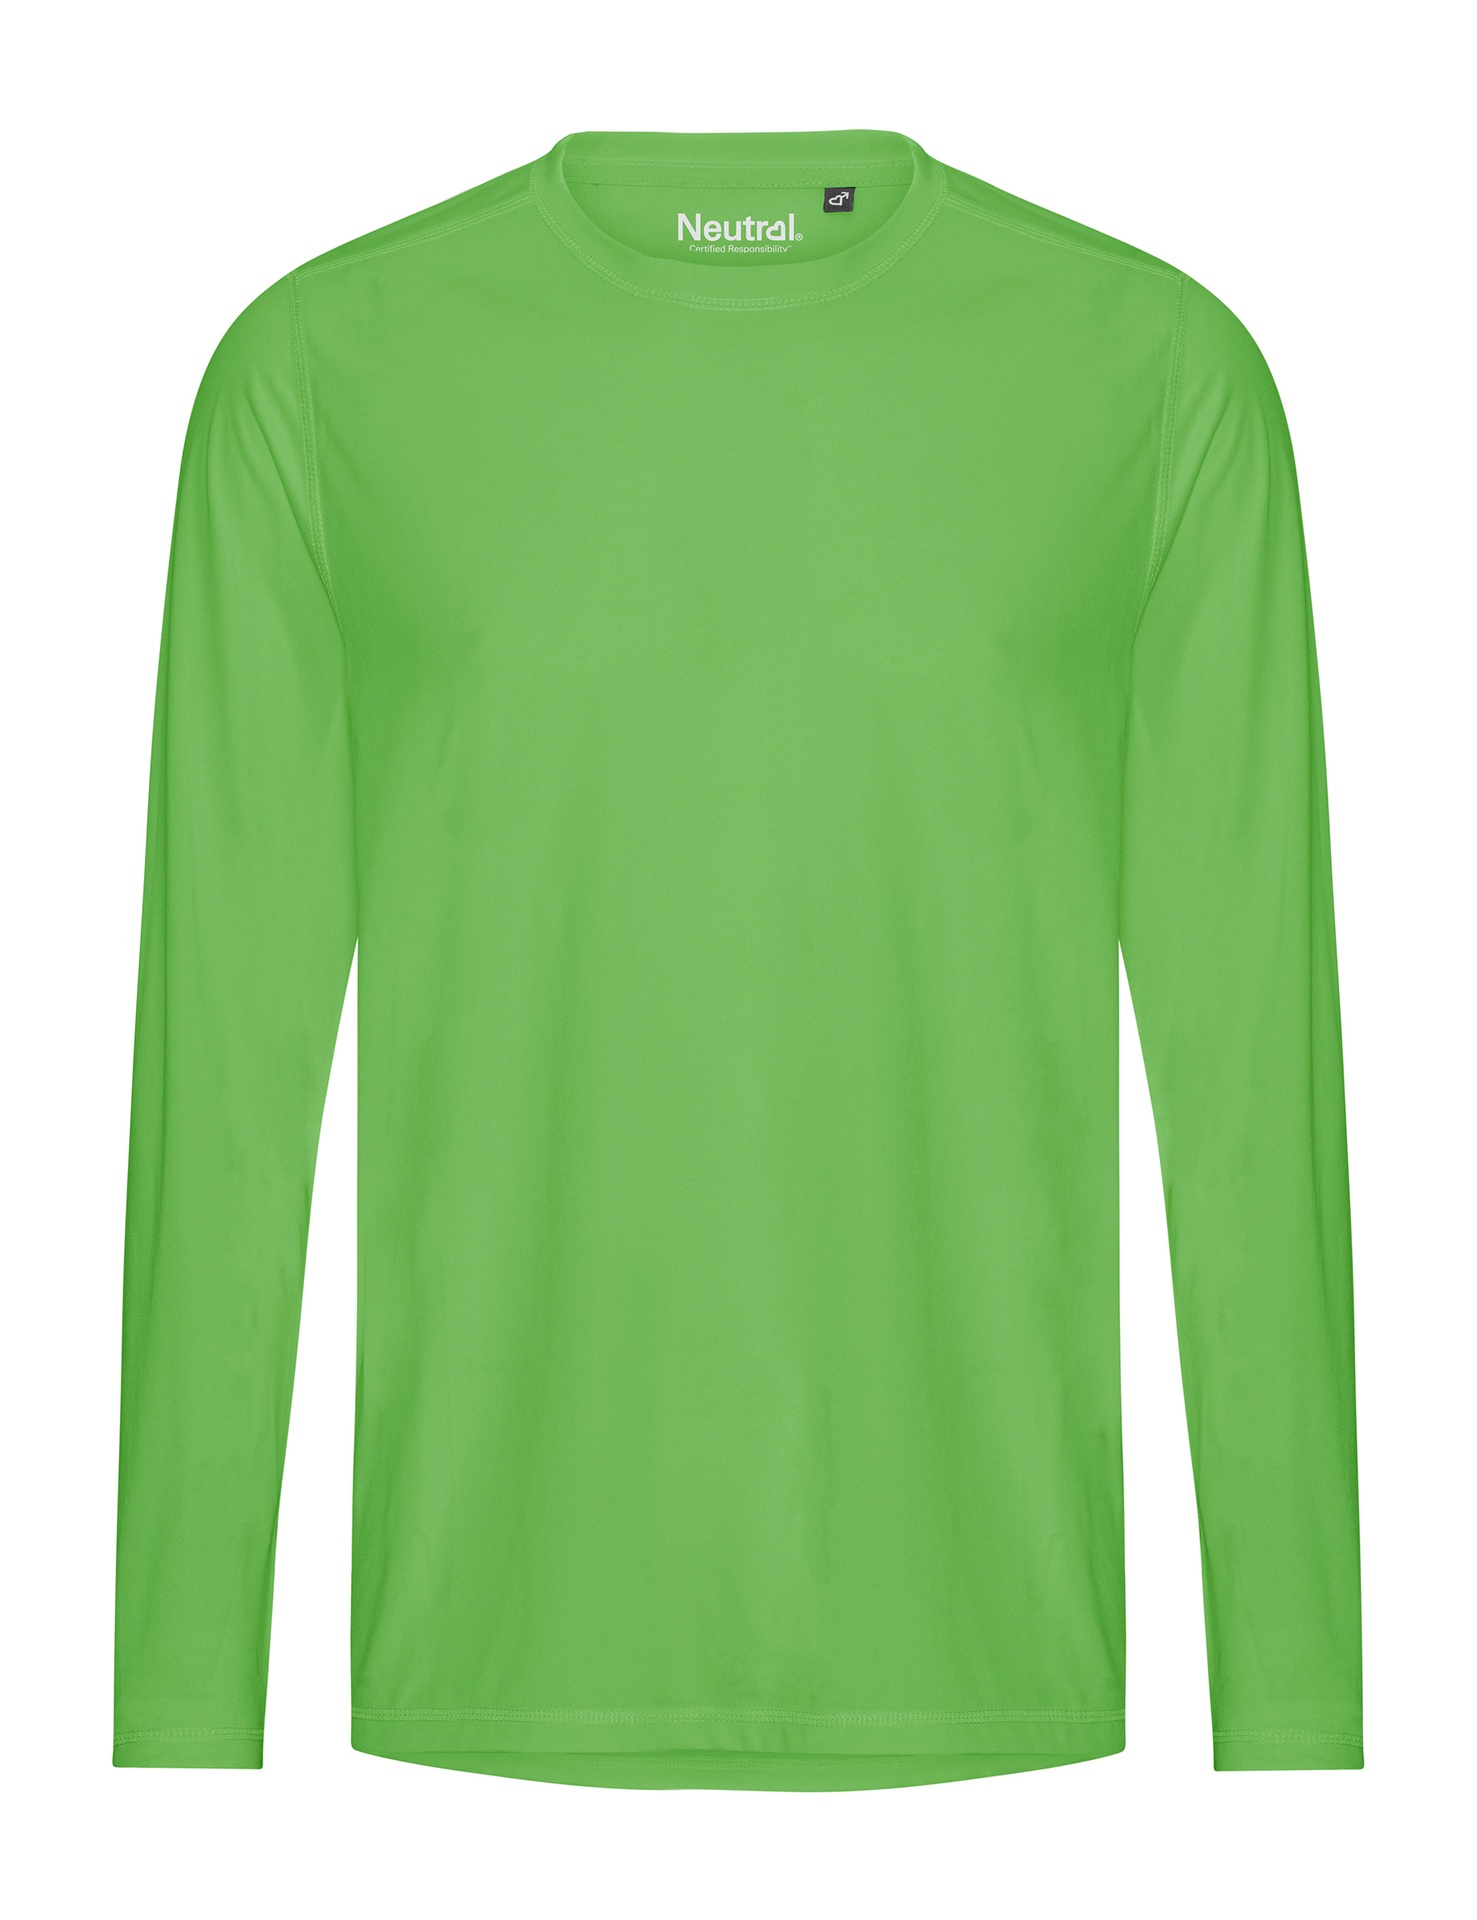 [PR/03838] Recycled Performance LS T-Shirt (Lime 12, S)